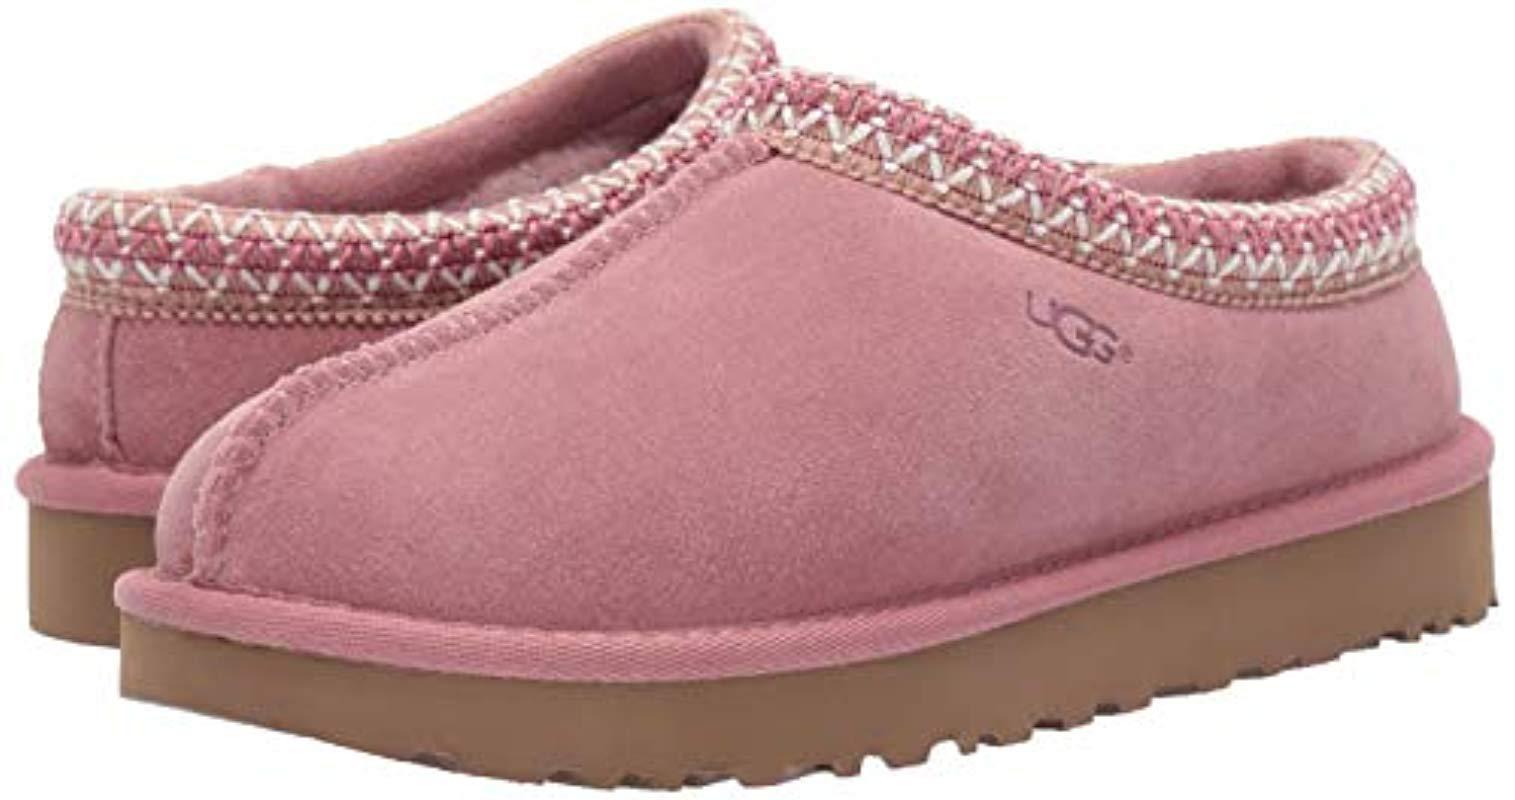 UGG Scuffette II Pink Slippers | ASOS